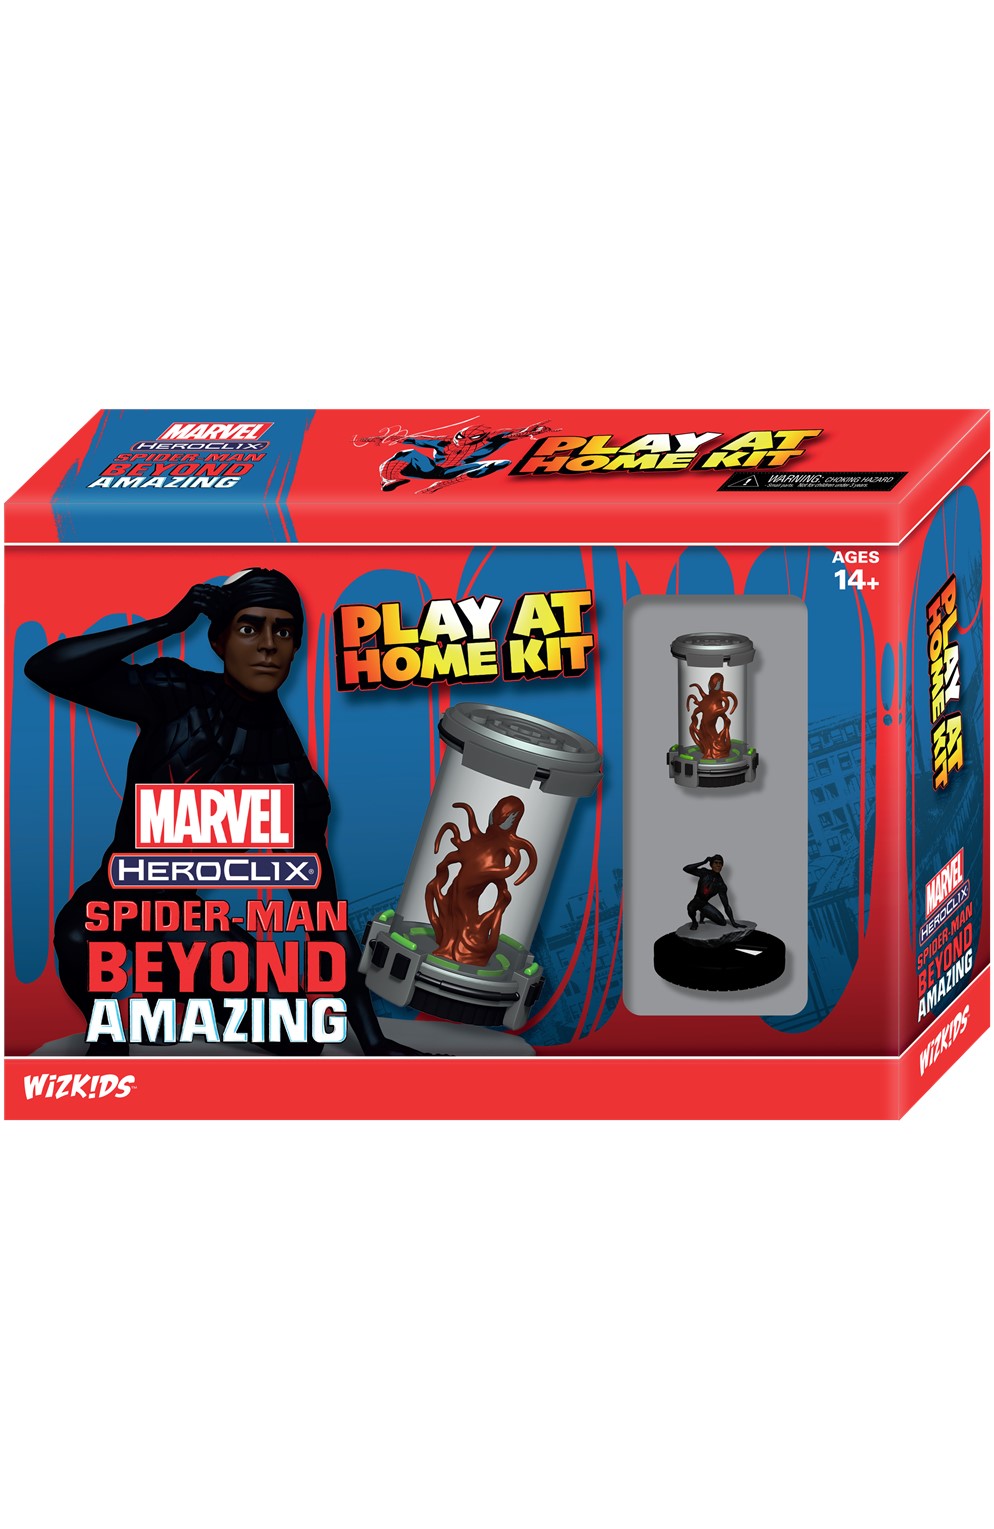 Marvel Heroclix Spider-Man Beyond Amazing Miles Morales Play At Home Kit